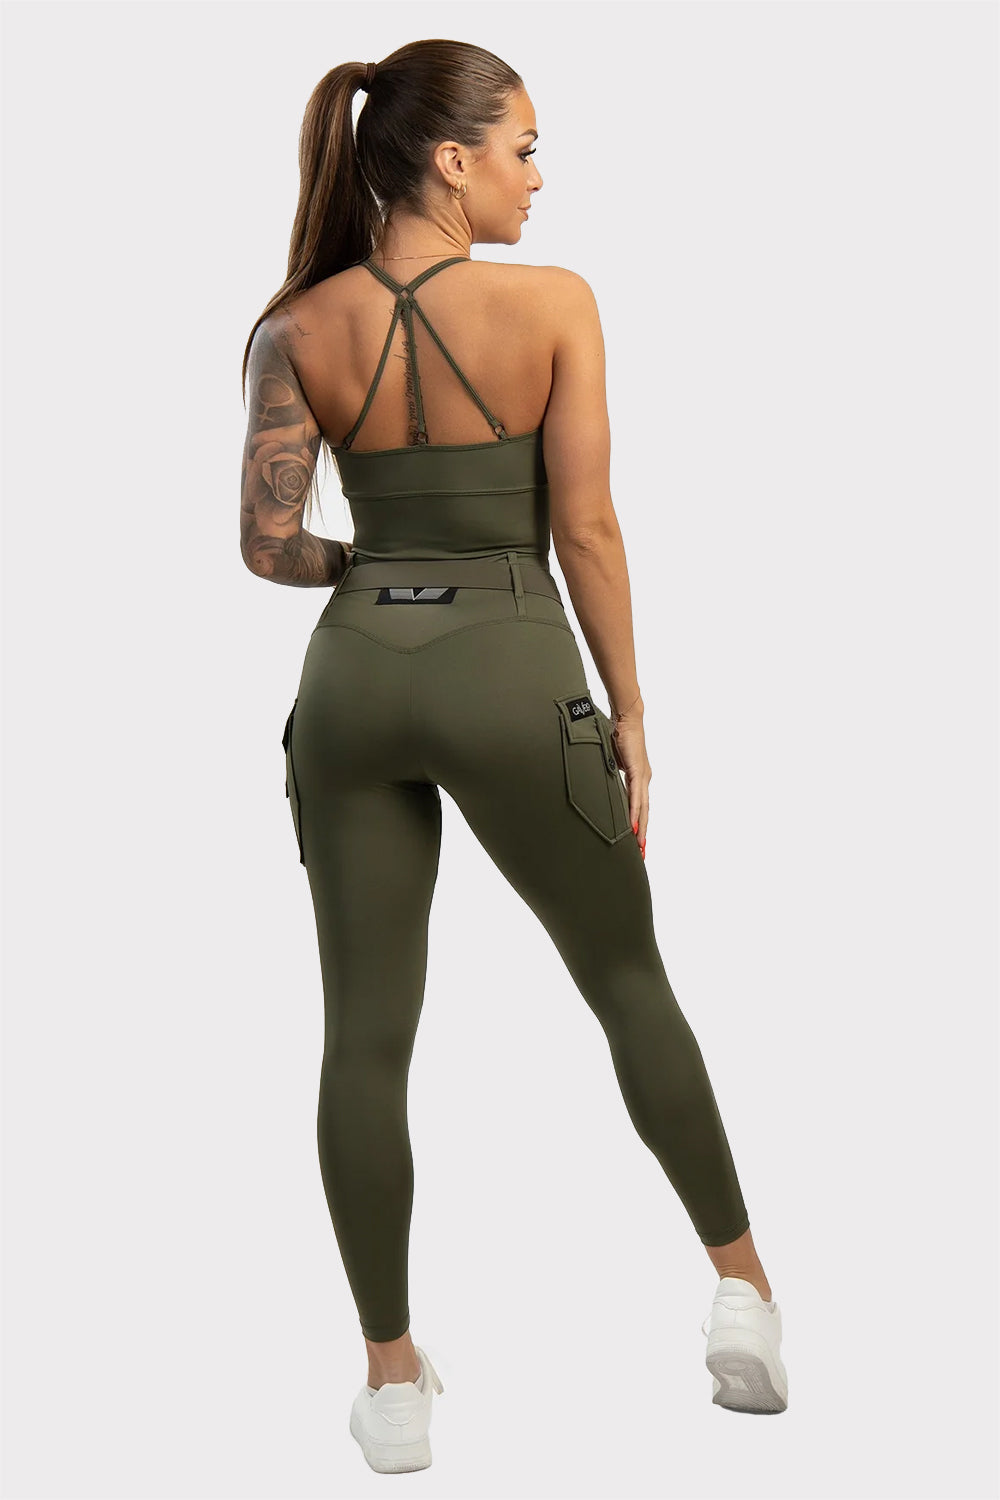 G CARGO TIGHTS - FEKETE  